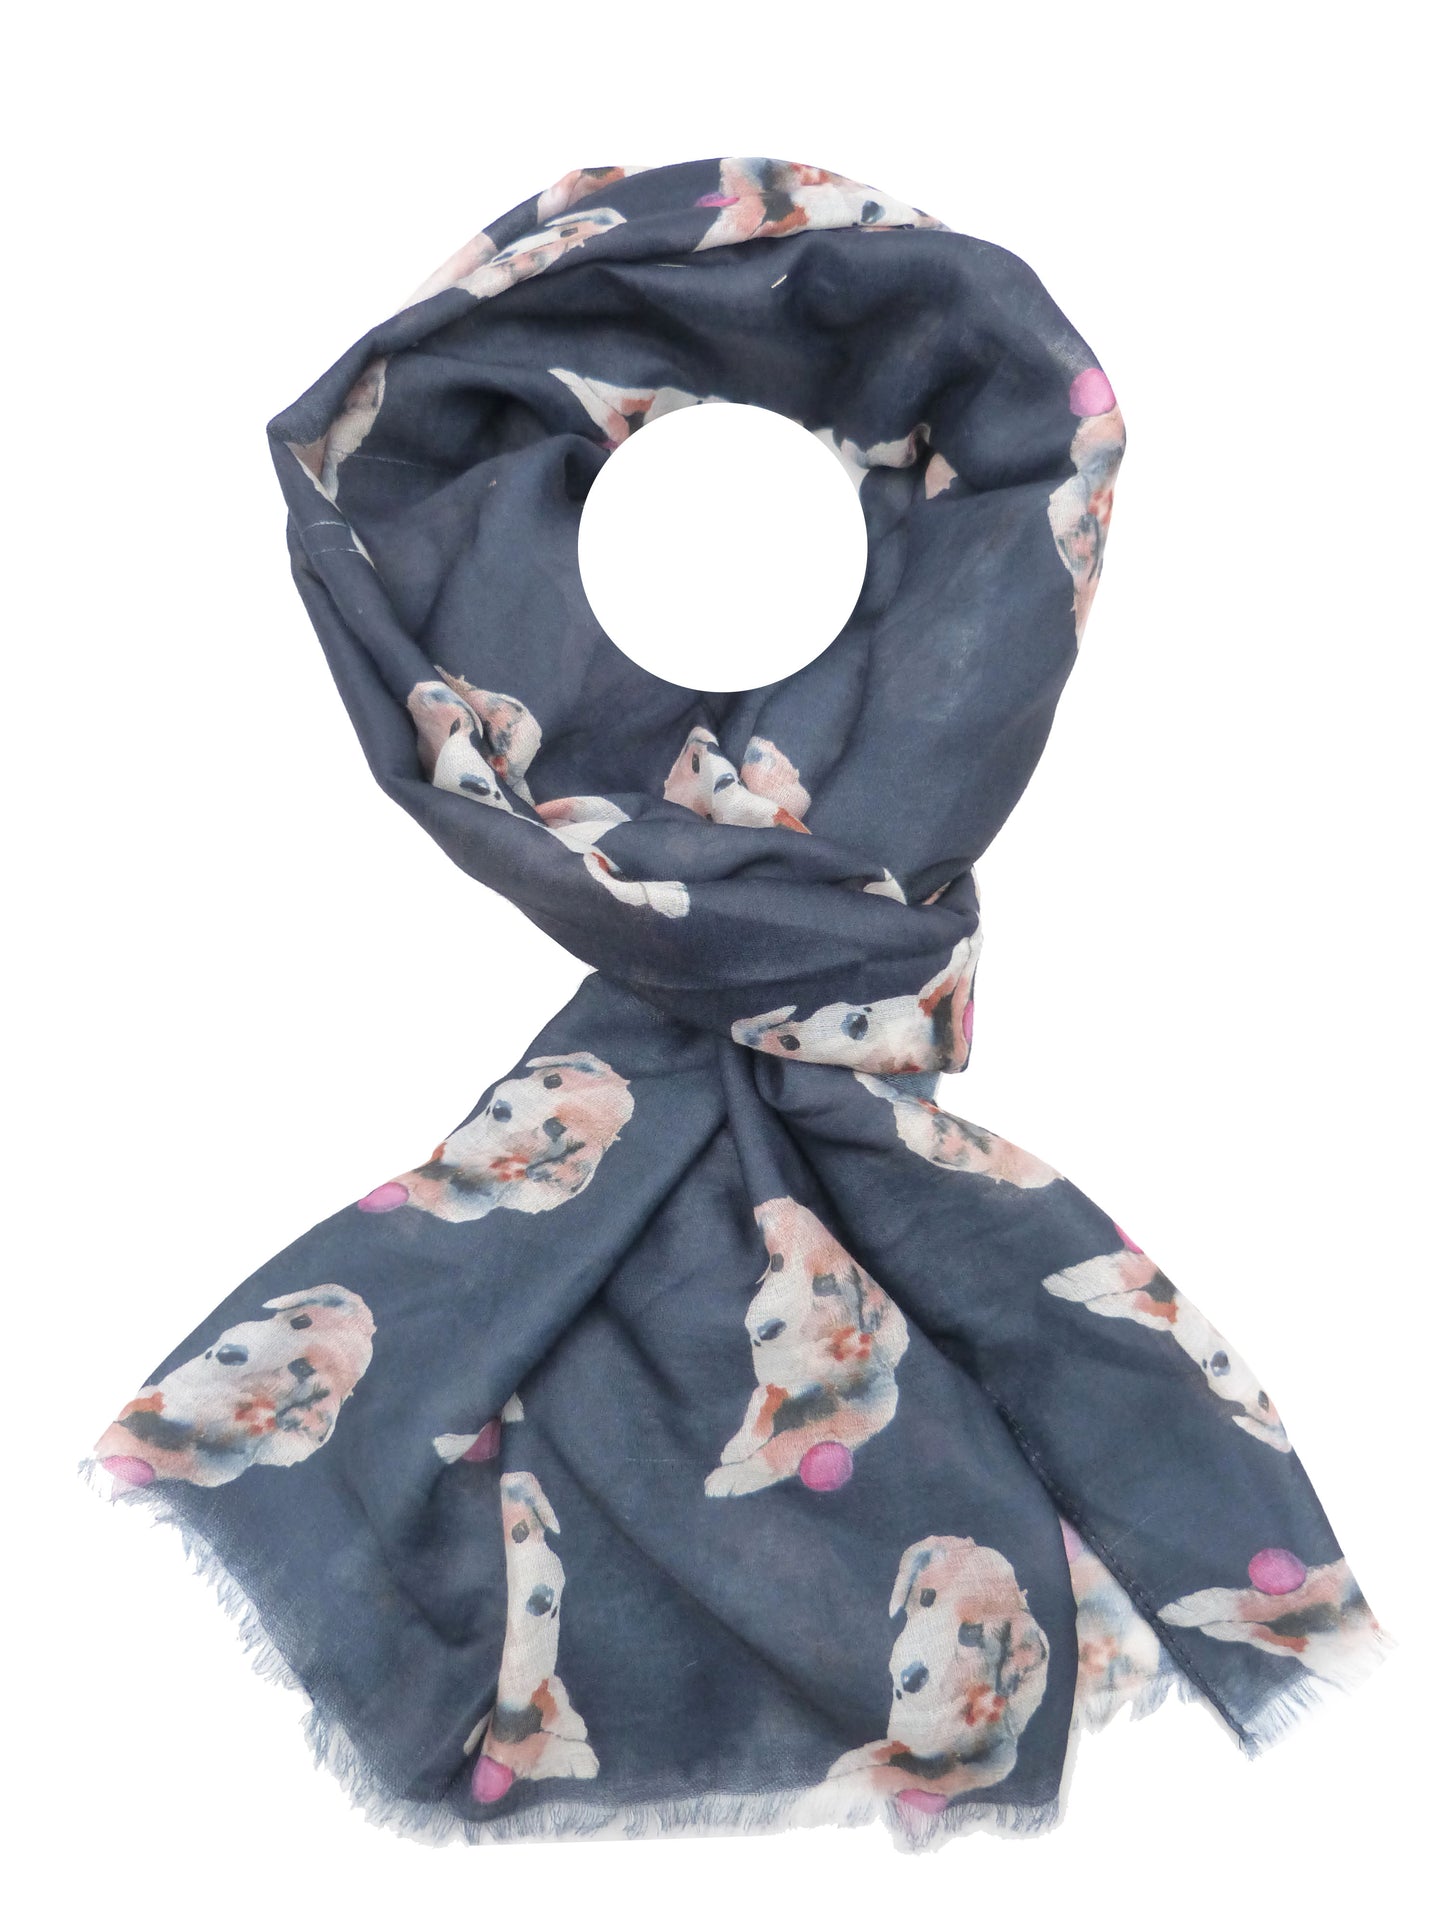 Cute Dog Print Scarf Come With Gift Box